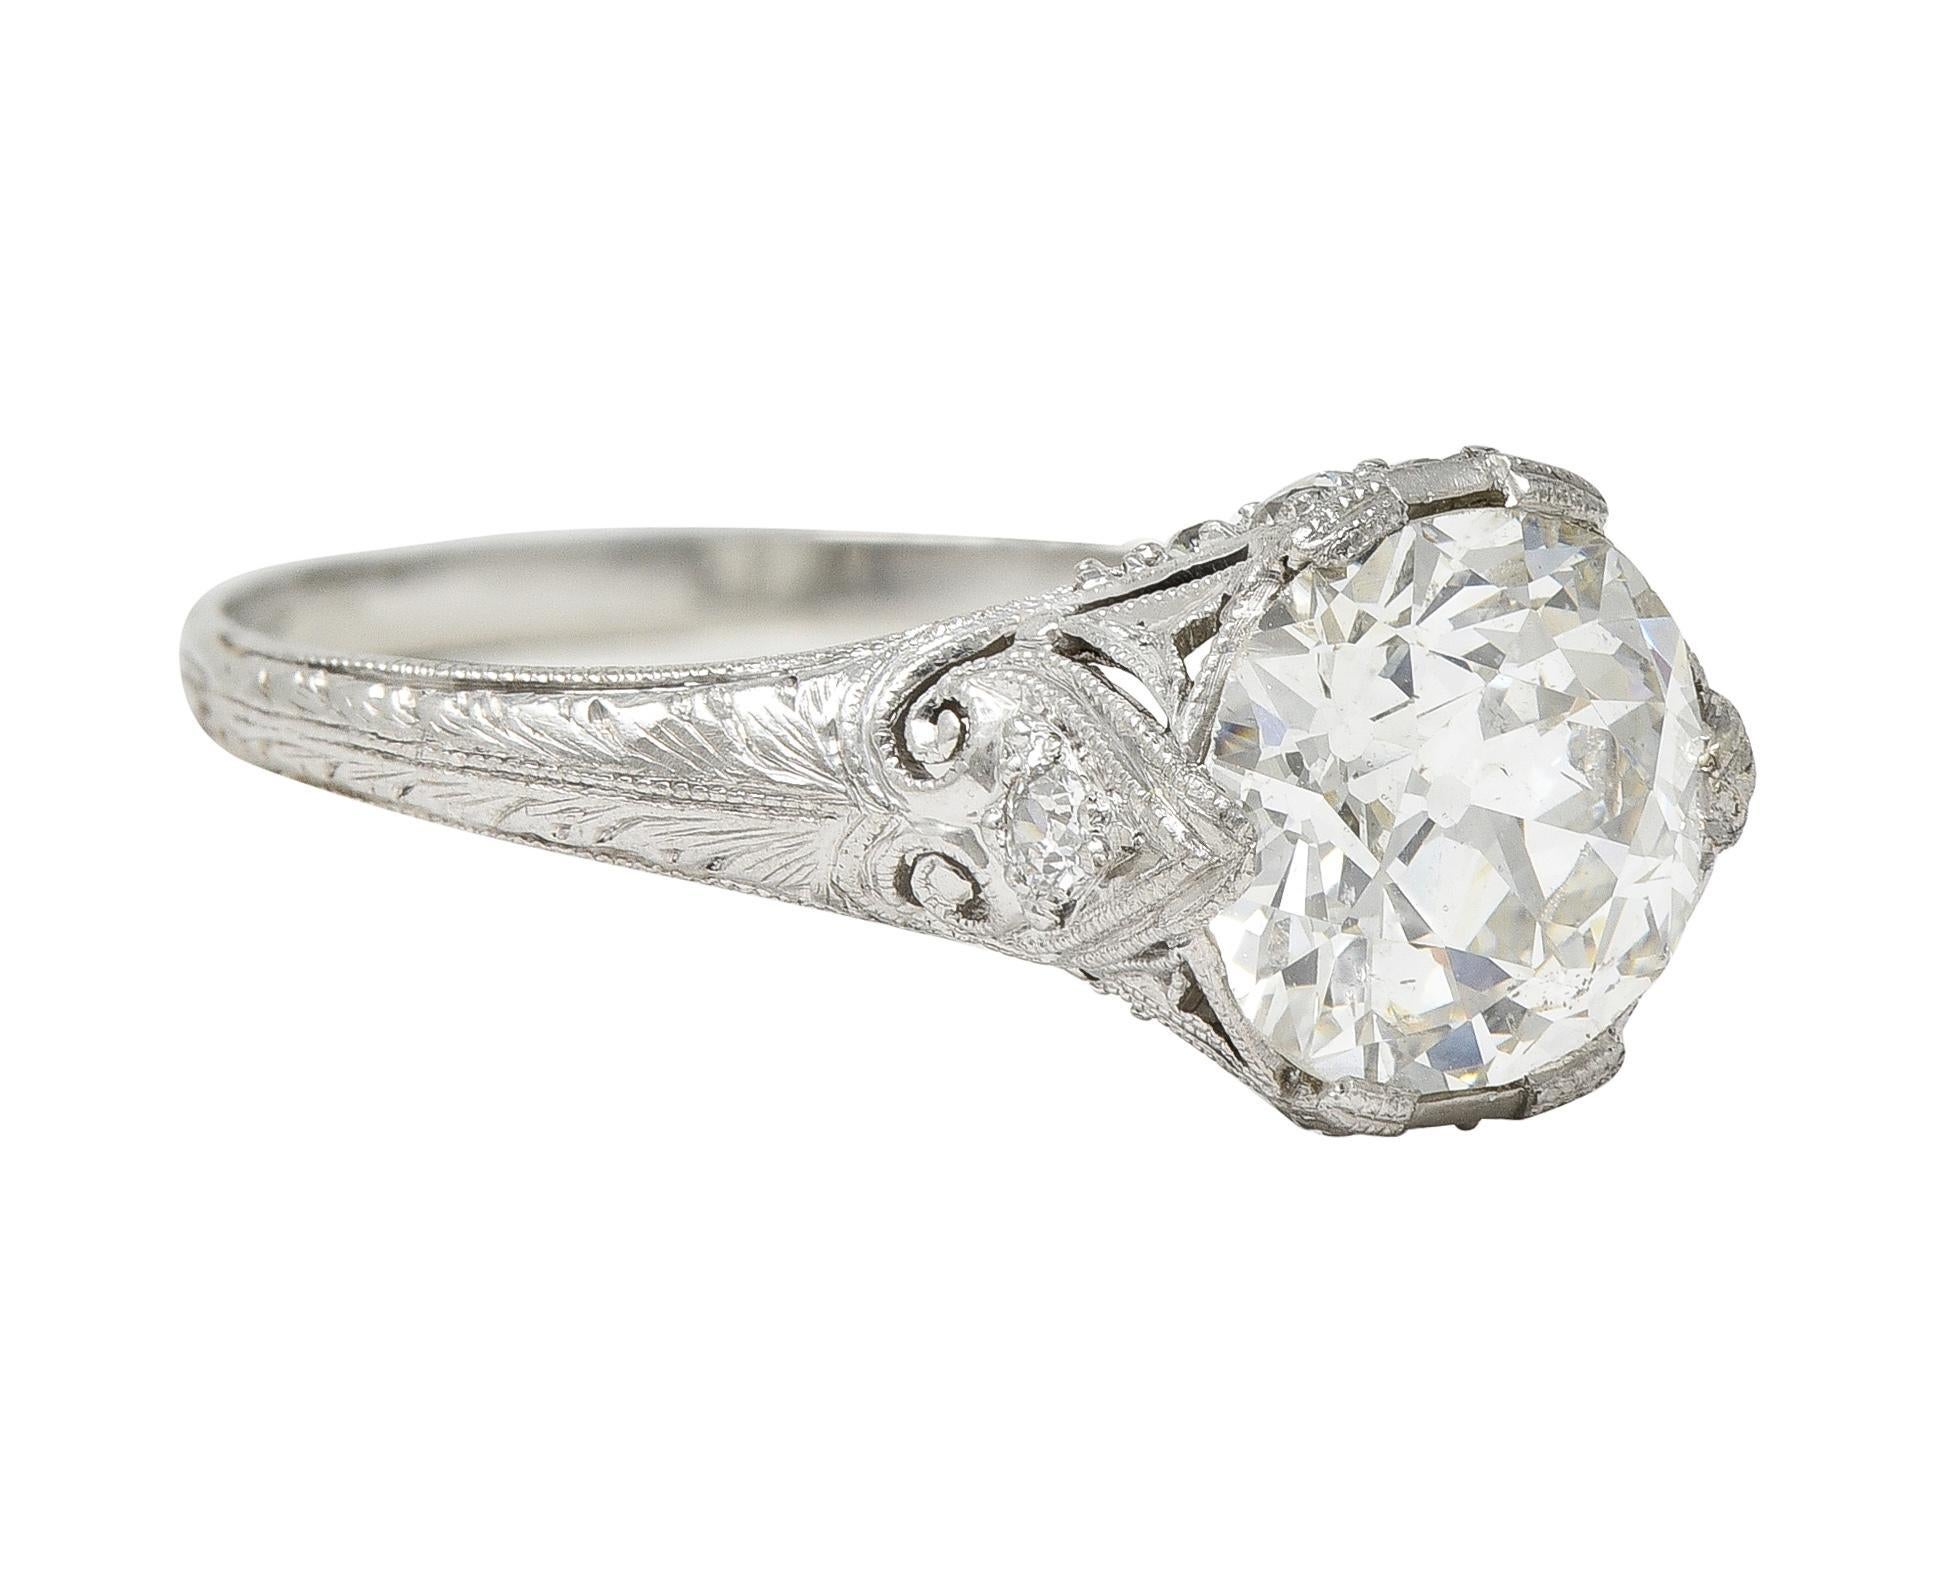 Edwardian 2.36 CTW Old European Cut Diamond Platinum Antique Engagement Ring In Excellent Condition For Sale In Philadelphia, PA